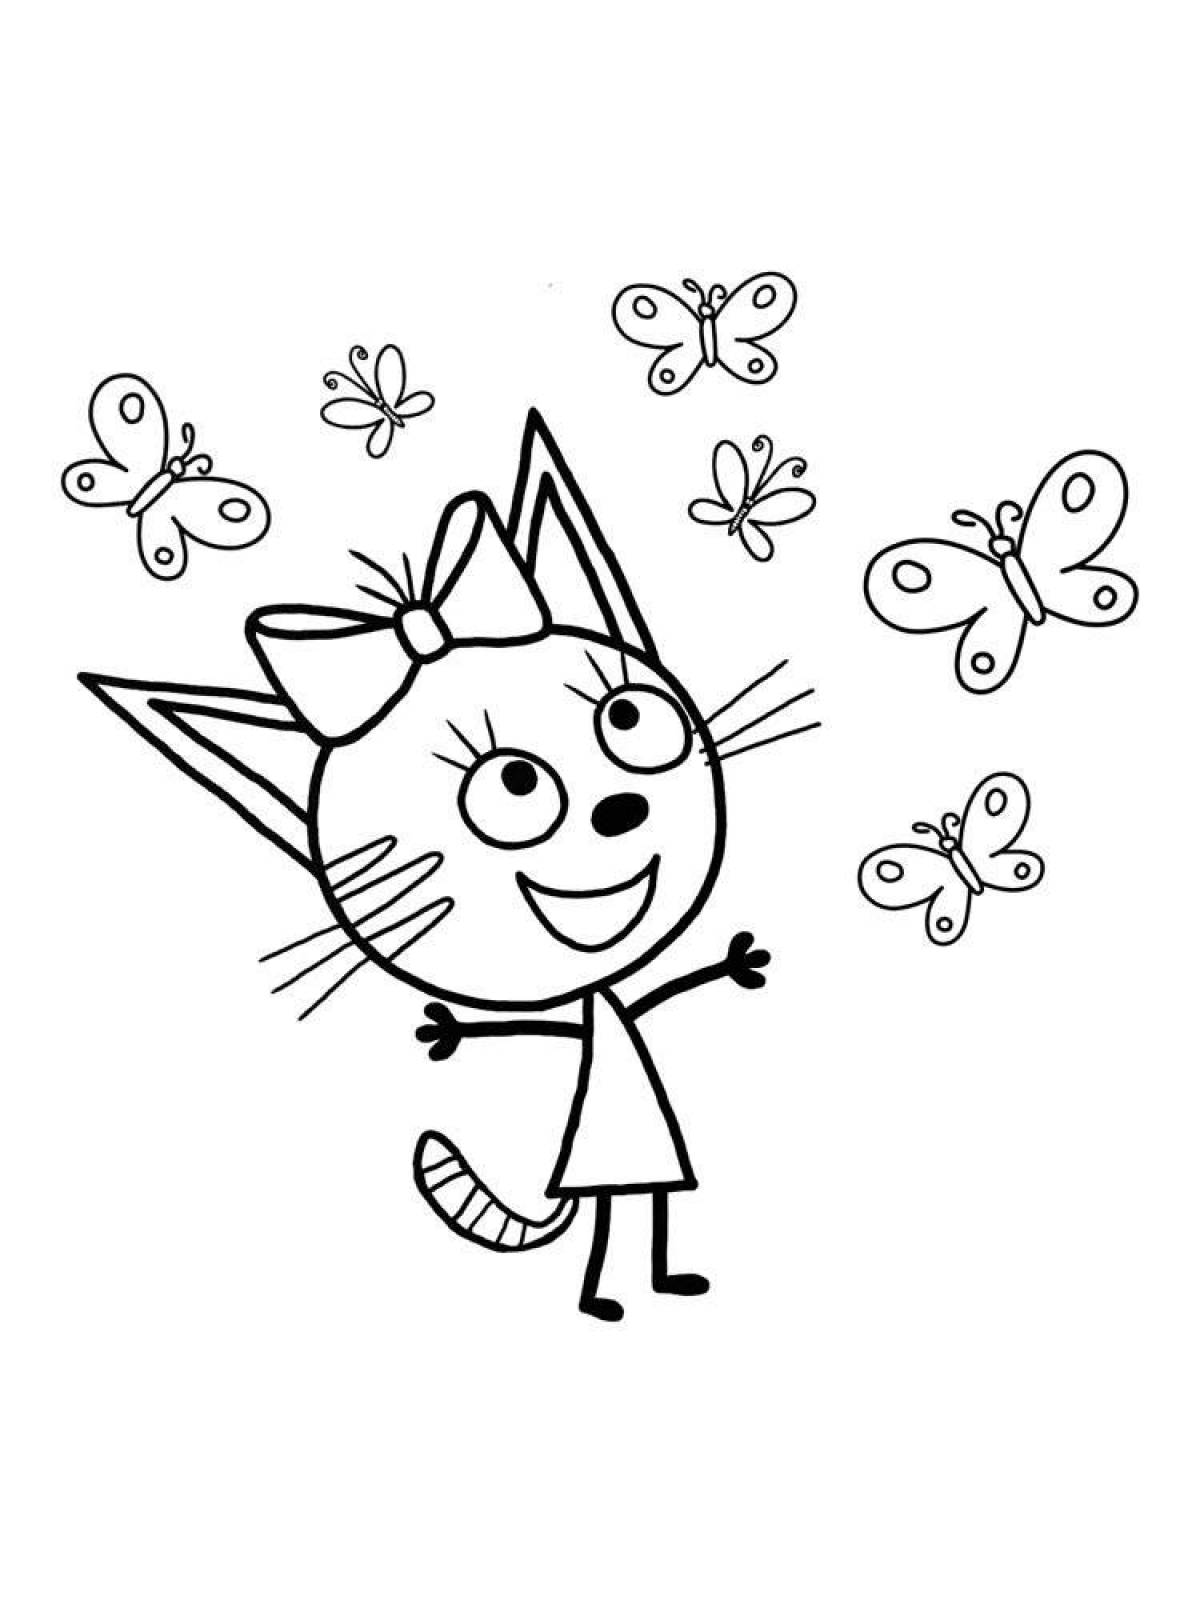 Three cats coloring book for little ones